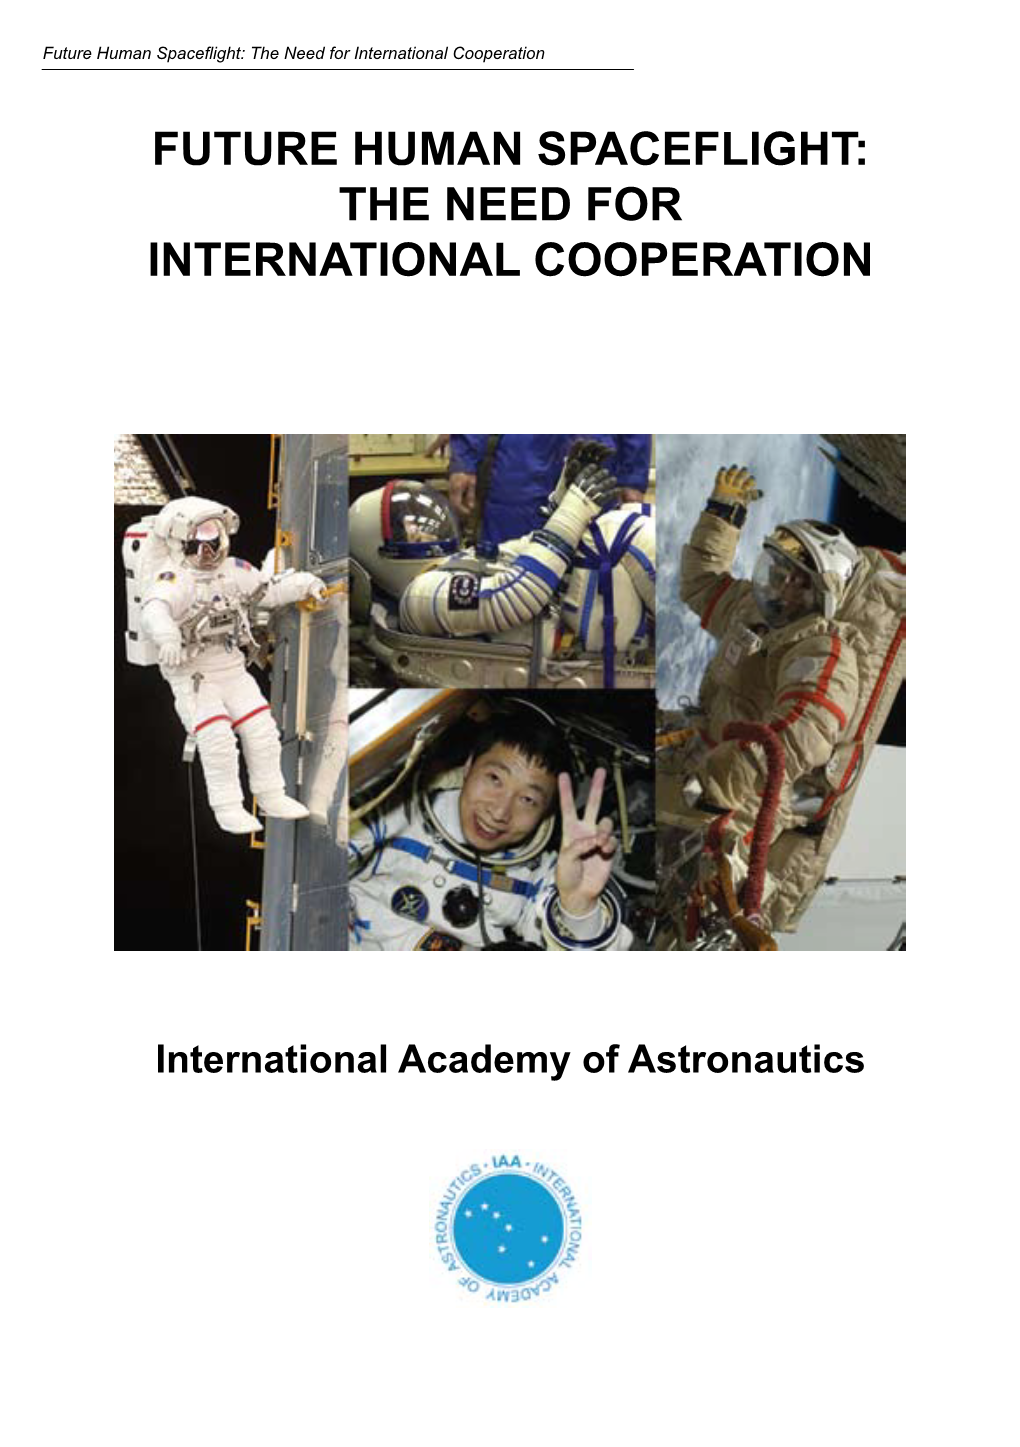 Future Human Spaceflight: the Need for International Cooperation